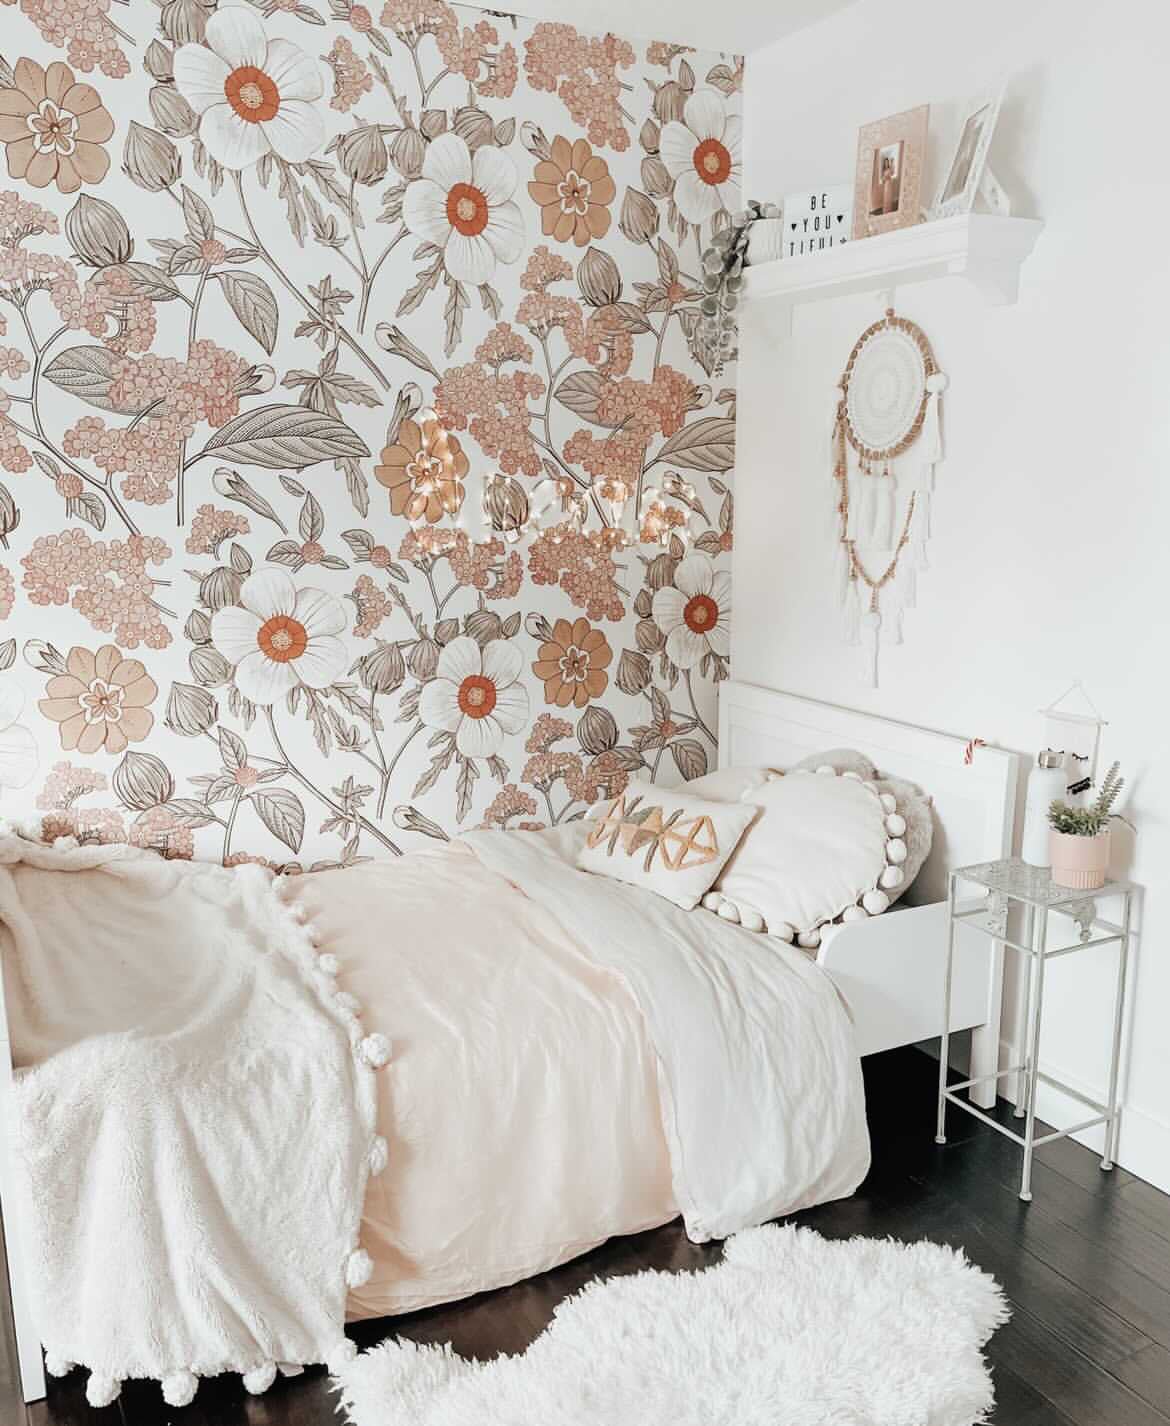 Peel and stick. Peel and stick wallpaper. Removable wallpaper. Modern Wallpaper. Floral Wallpaper. Boho Decor. Wallpapers